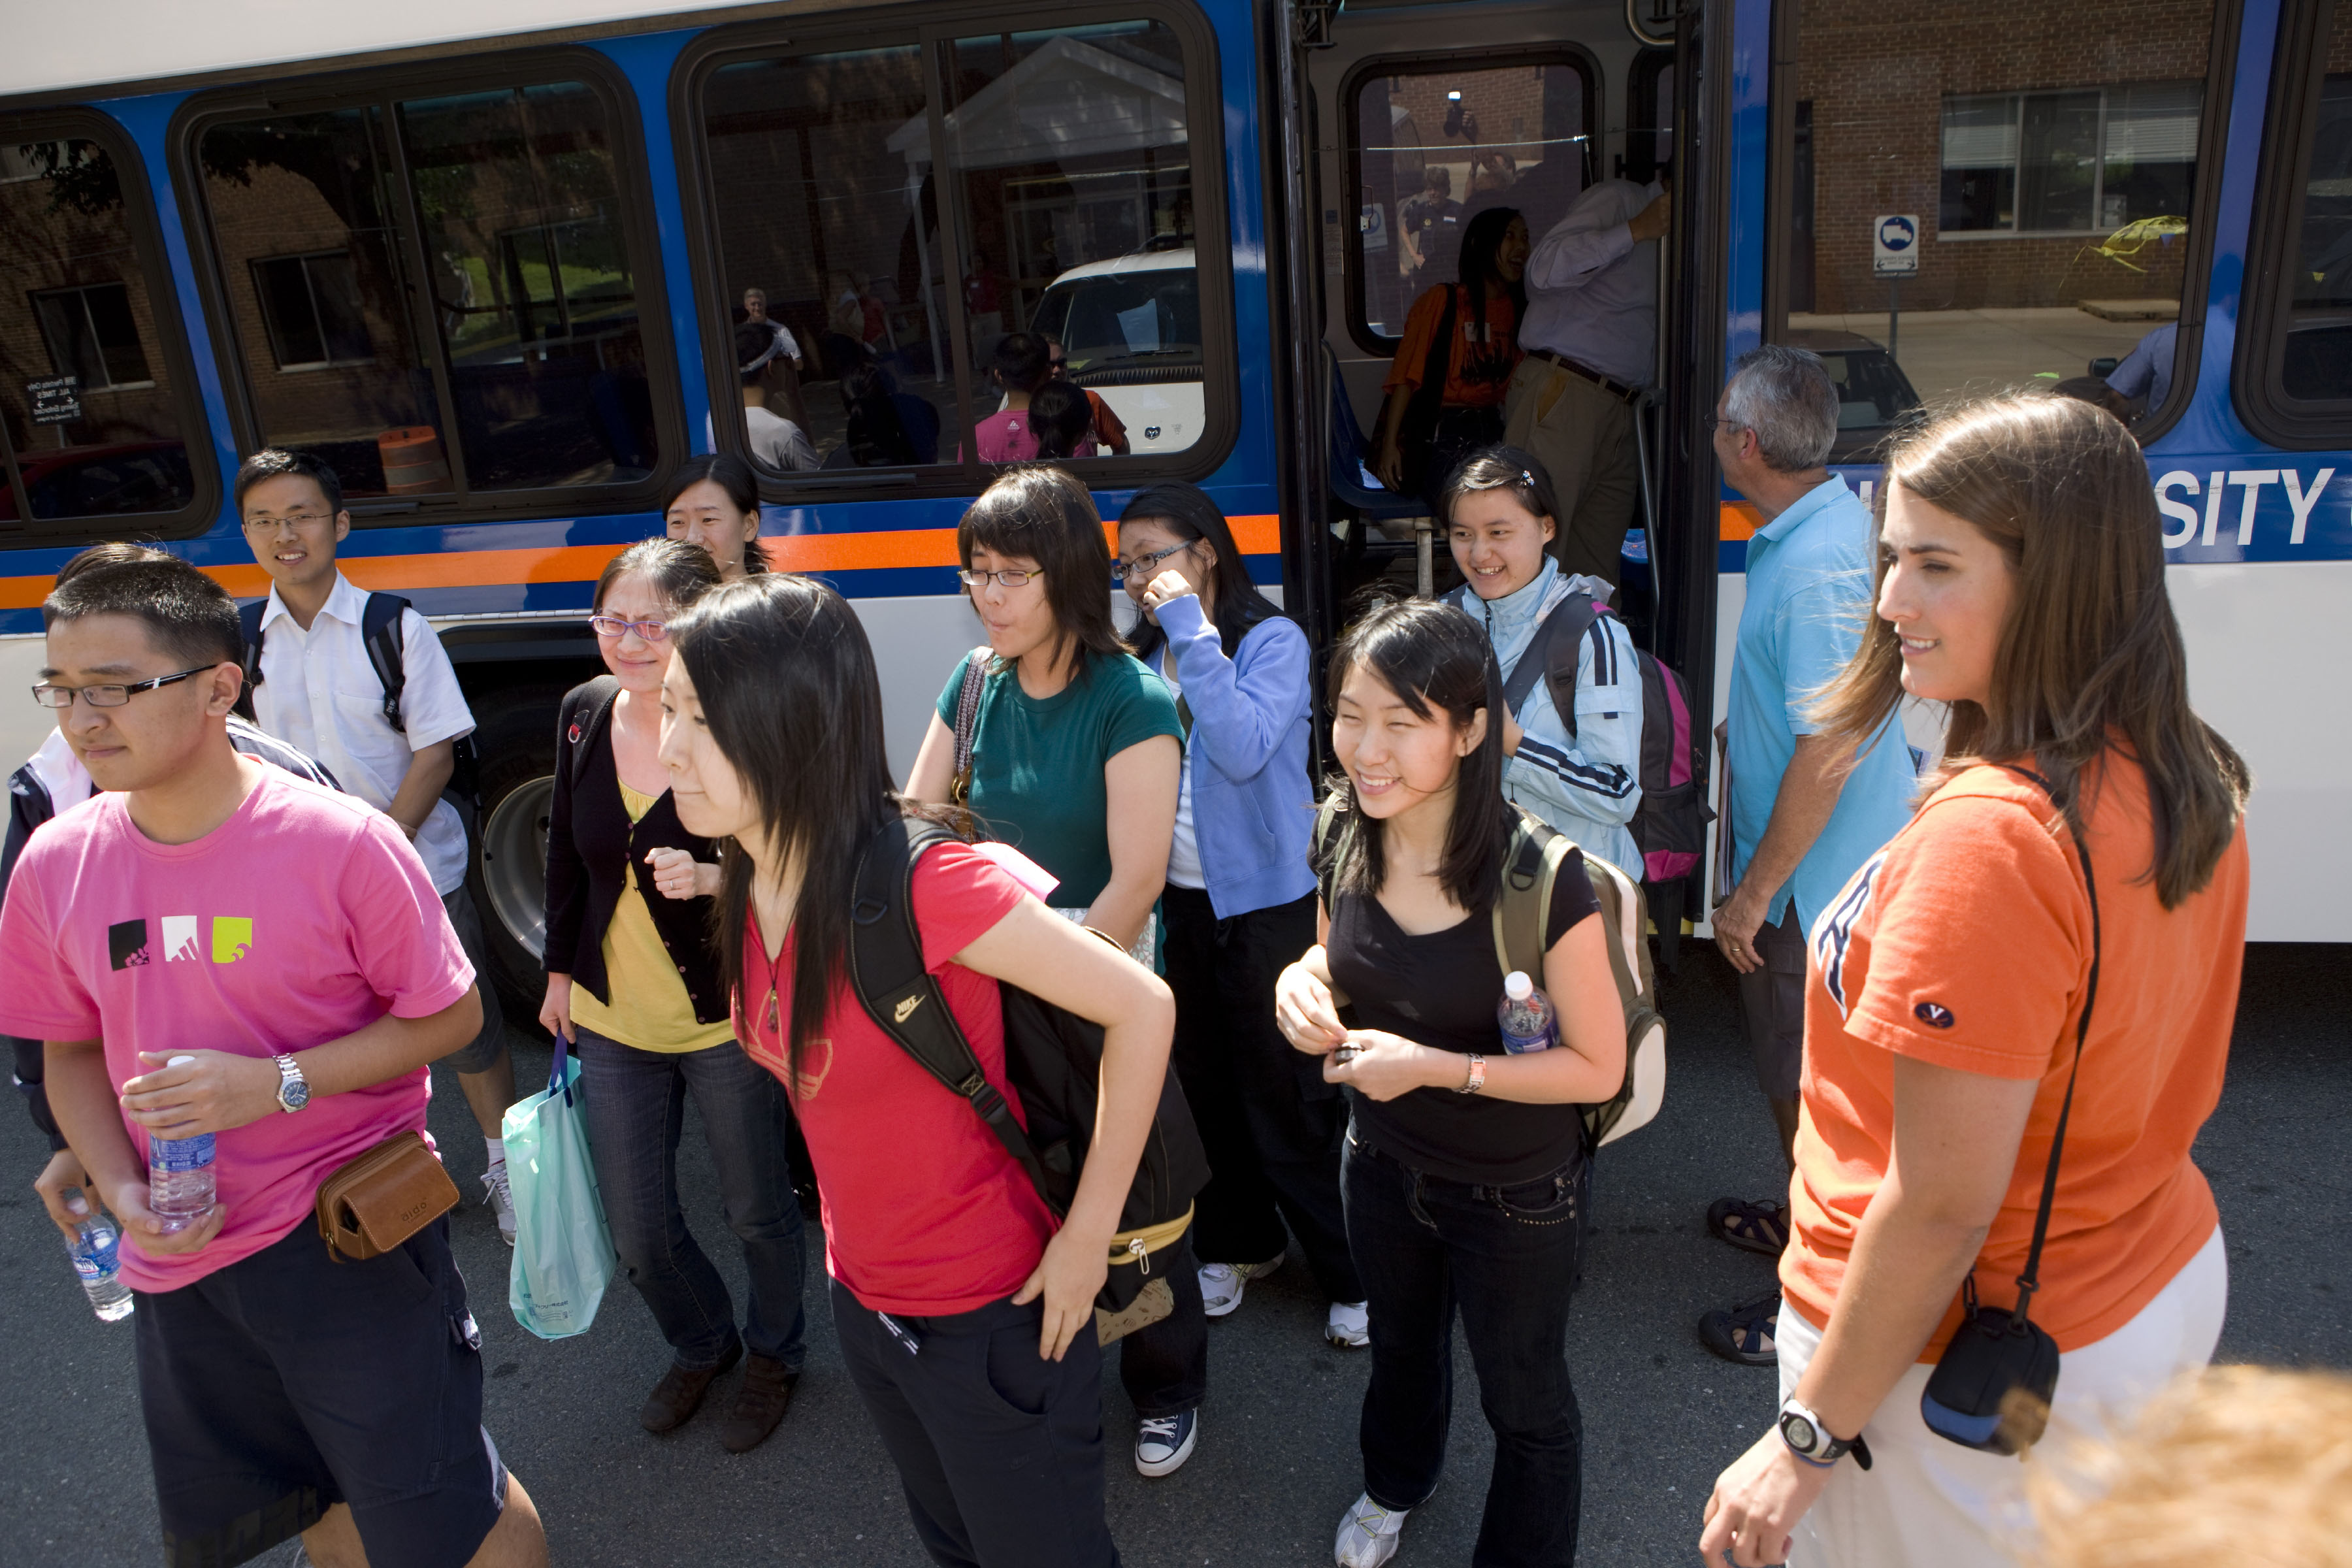 Students getting off of a public transportation bus